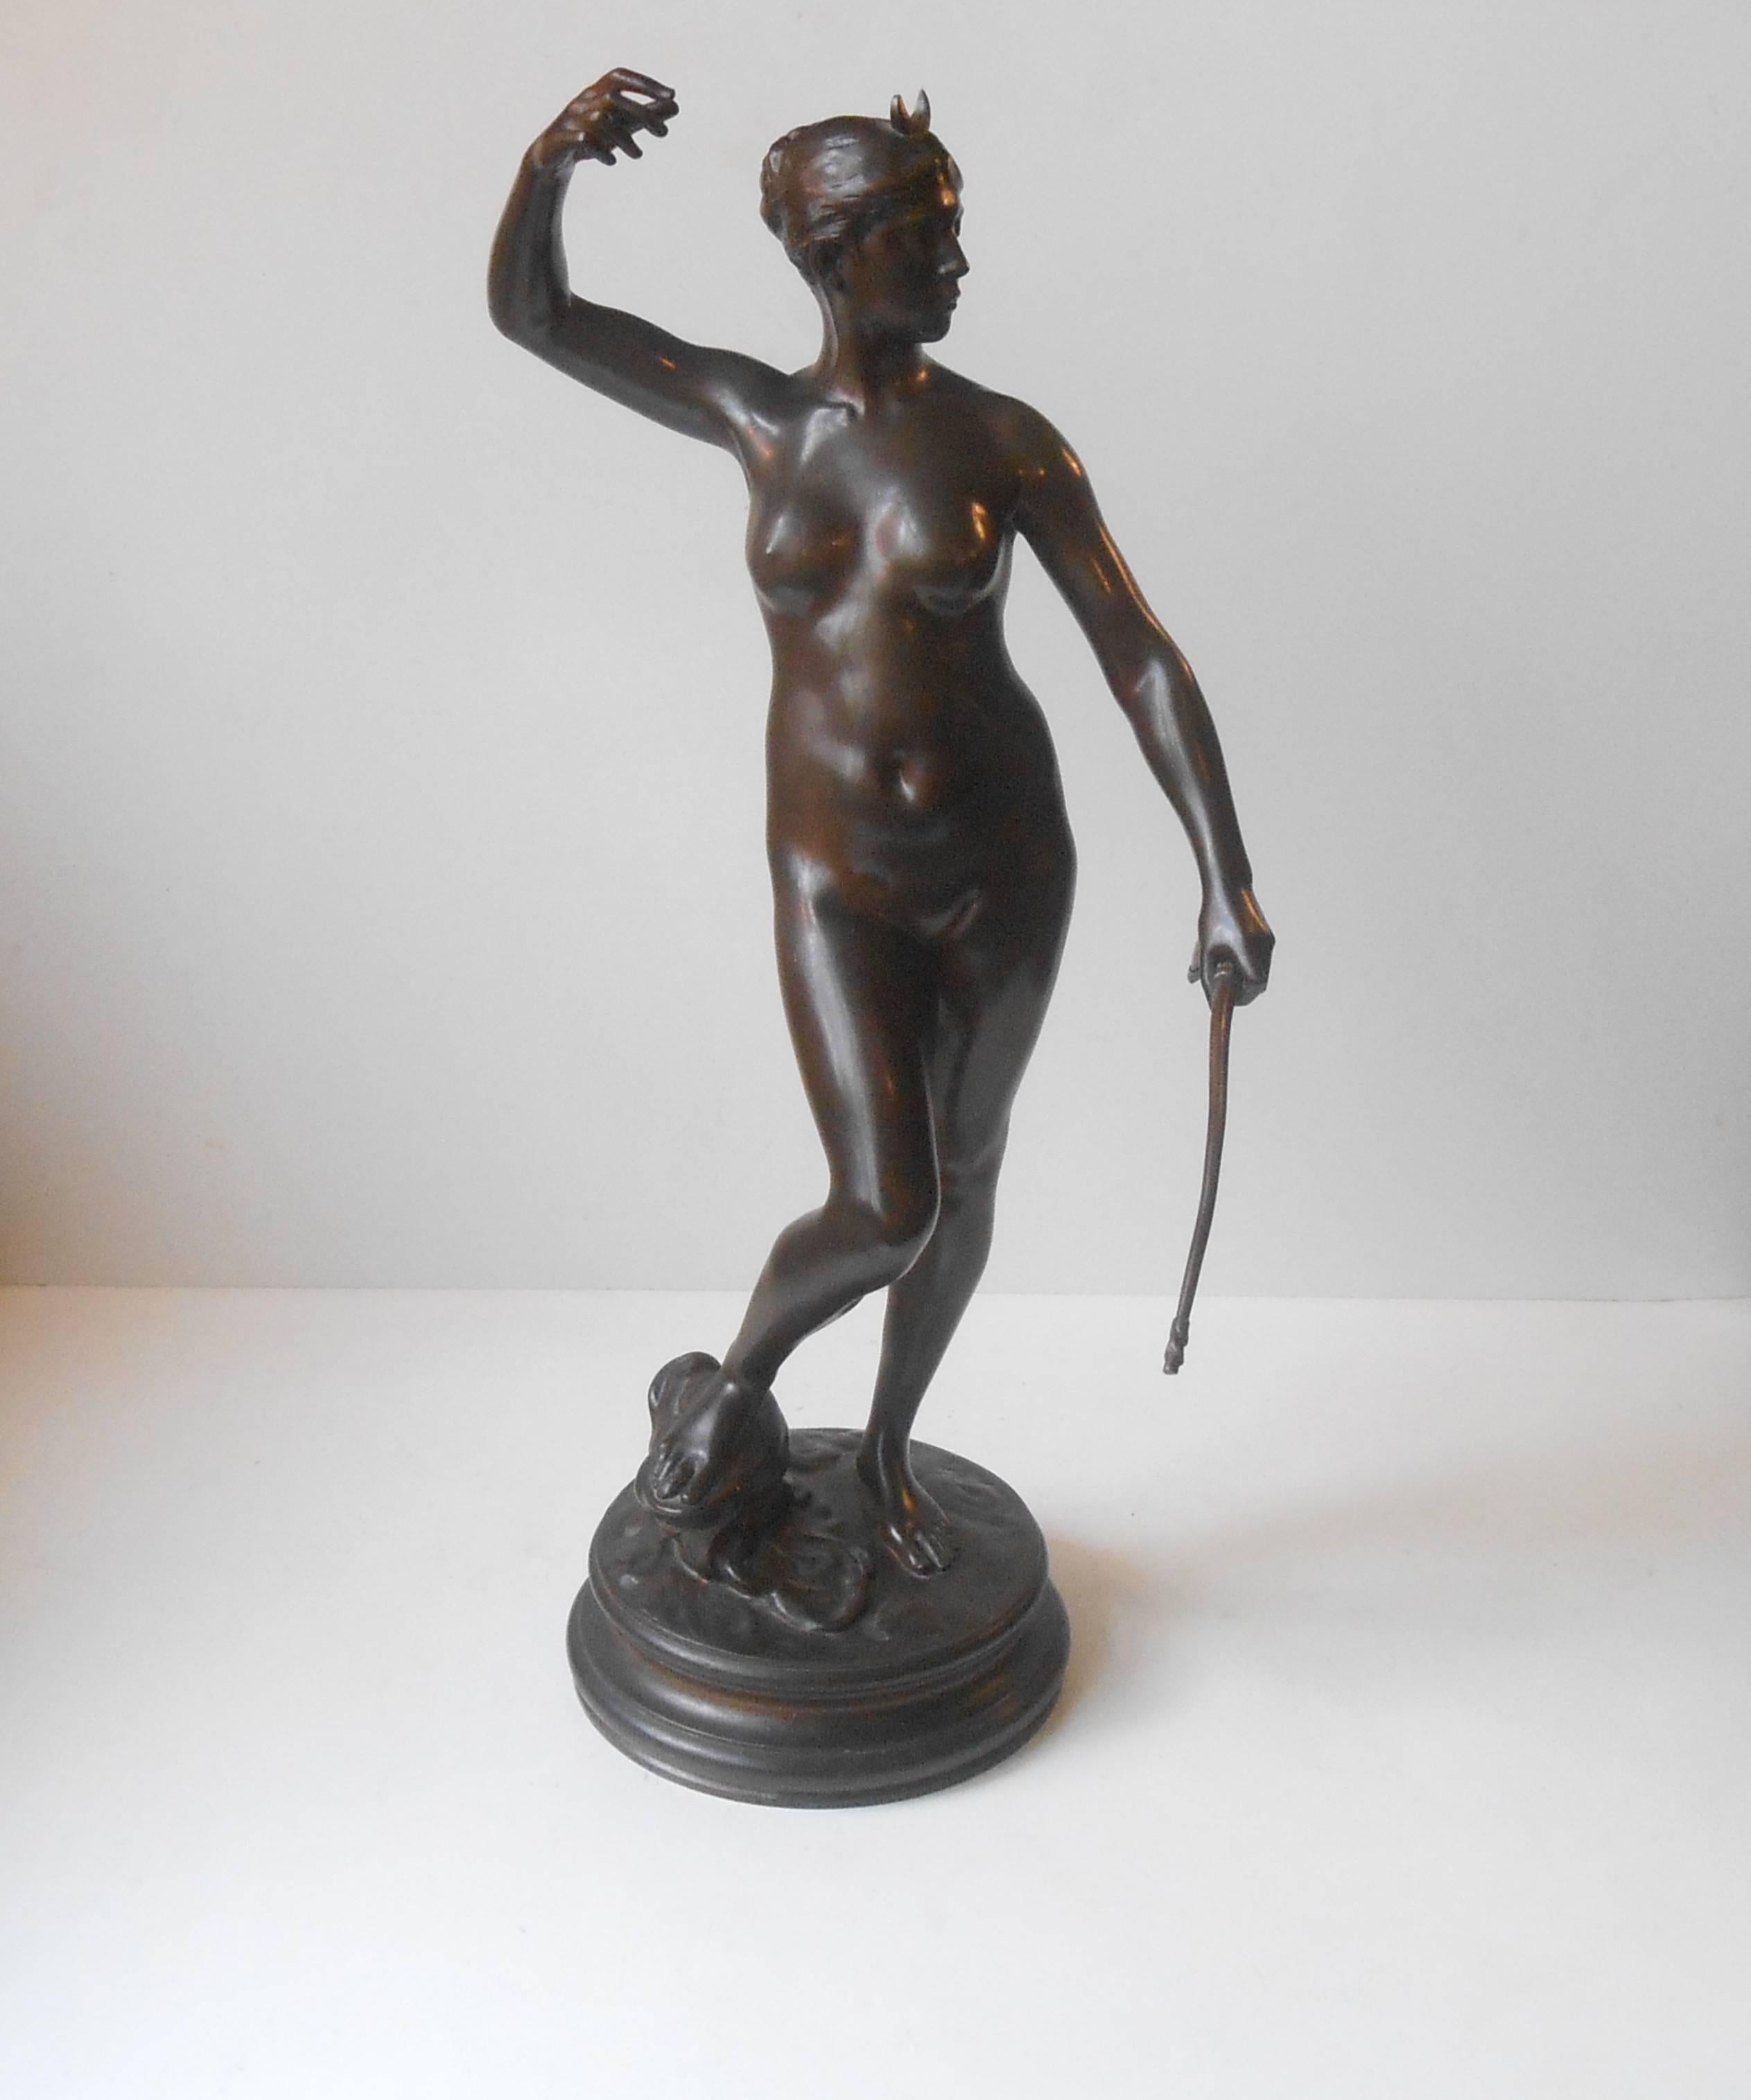 Beautiful, detailed and evenly patinated bronze of 'Diana The Huntress' by Jean Alexandre Joseph Falguiere - signed A. Falguiere. Cast in Paris by: Thiebaut Freres Fondeurs. Pastille: Bronze. Brown patina. Measurements: H: 18.5 inches, base